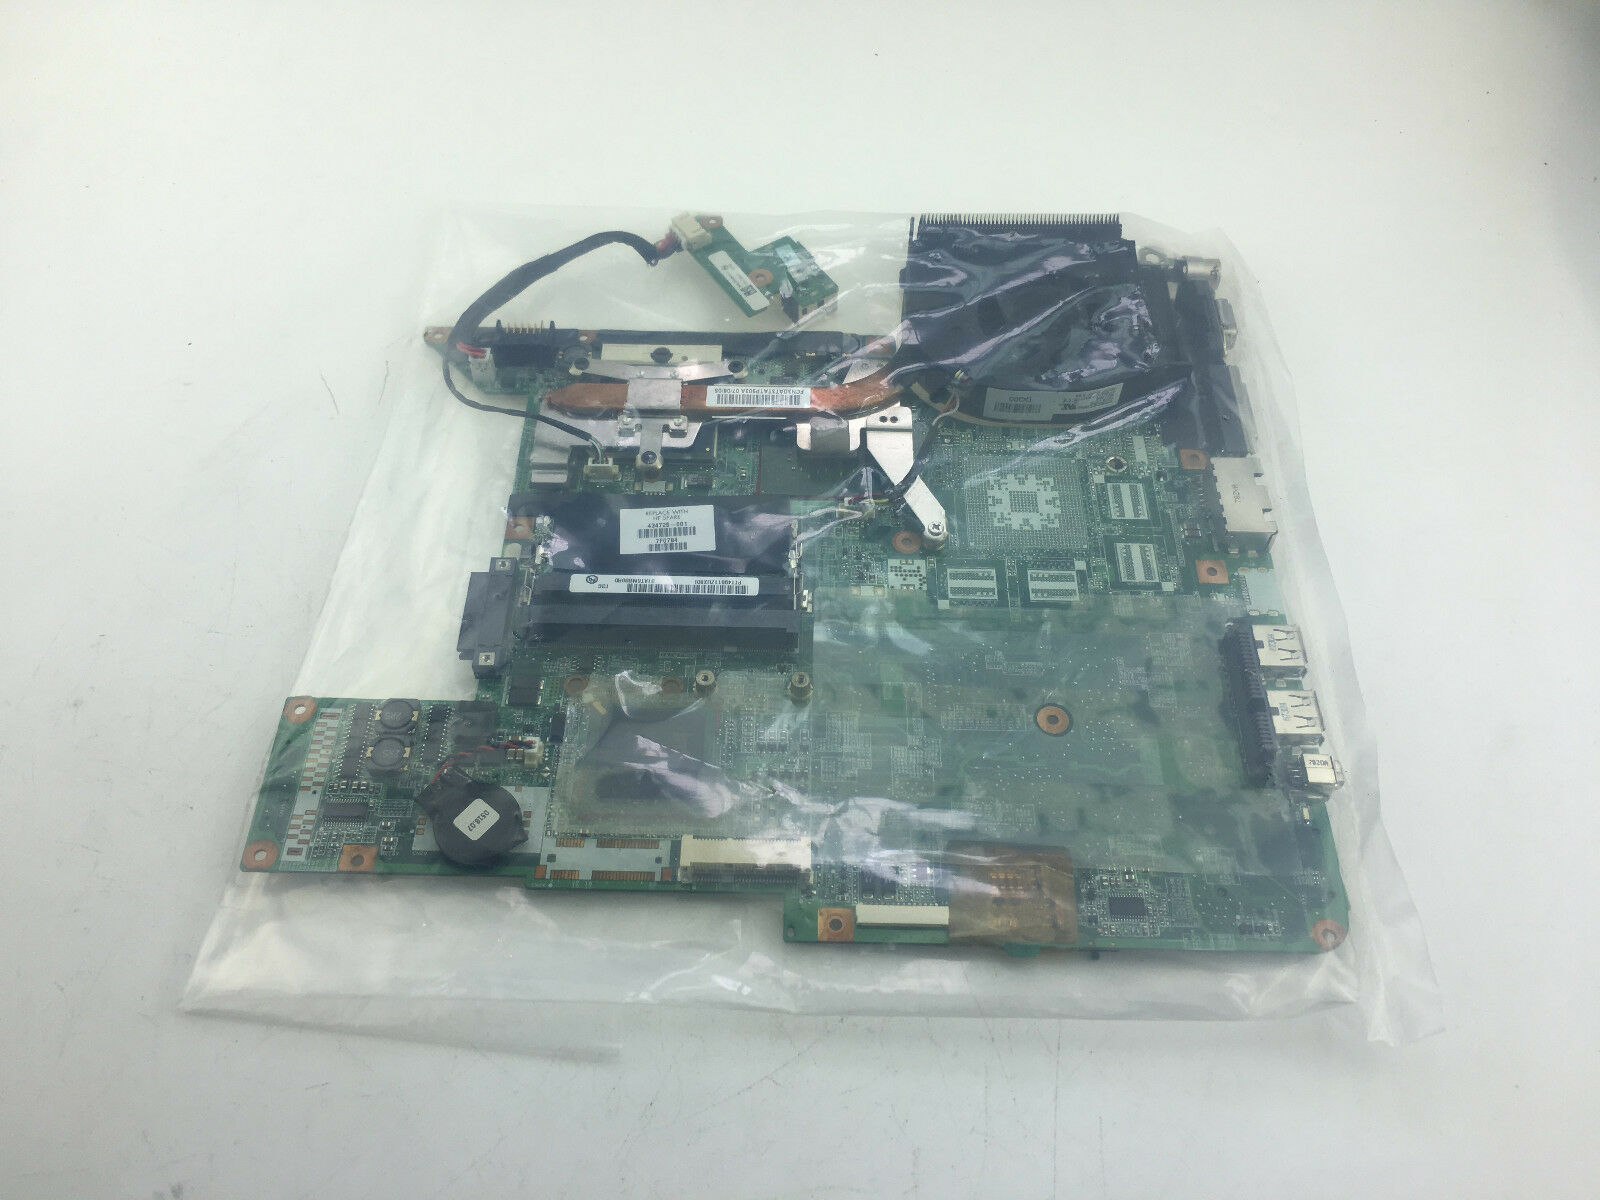 434725-001 HP Pavilion DV6000 DV6500 DV6700 laptop motherboard,945GM Compatible CPU Brand: Intel MPN: Does - Click Image to Close